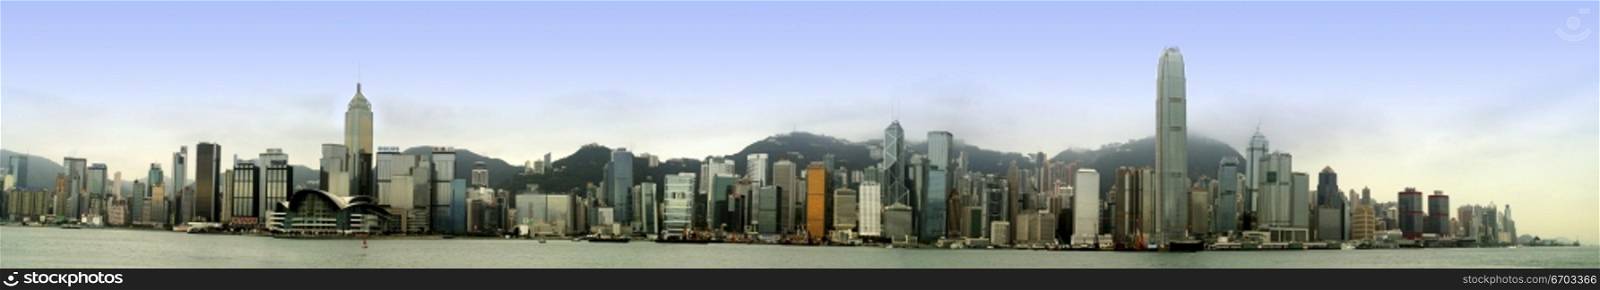 A stock panoramic photo of buildings in Hong Kong, a typical lifestyle in a big crowded city in Asia.